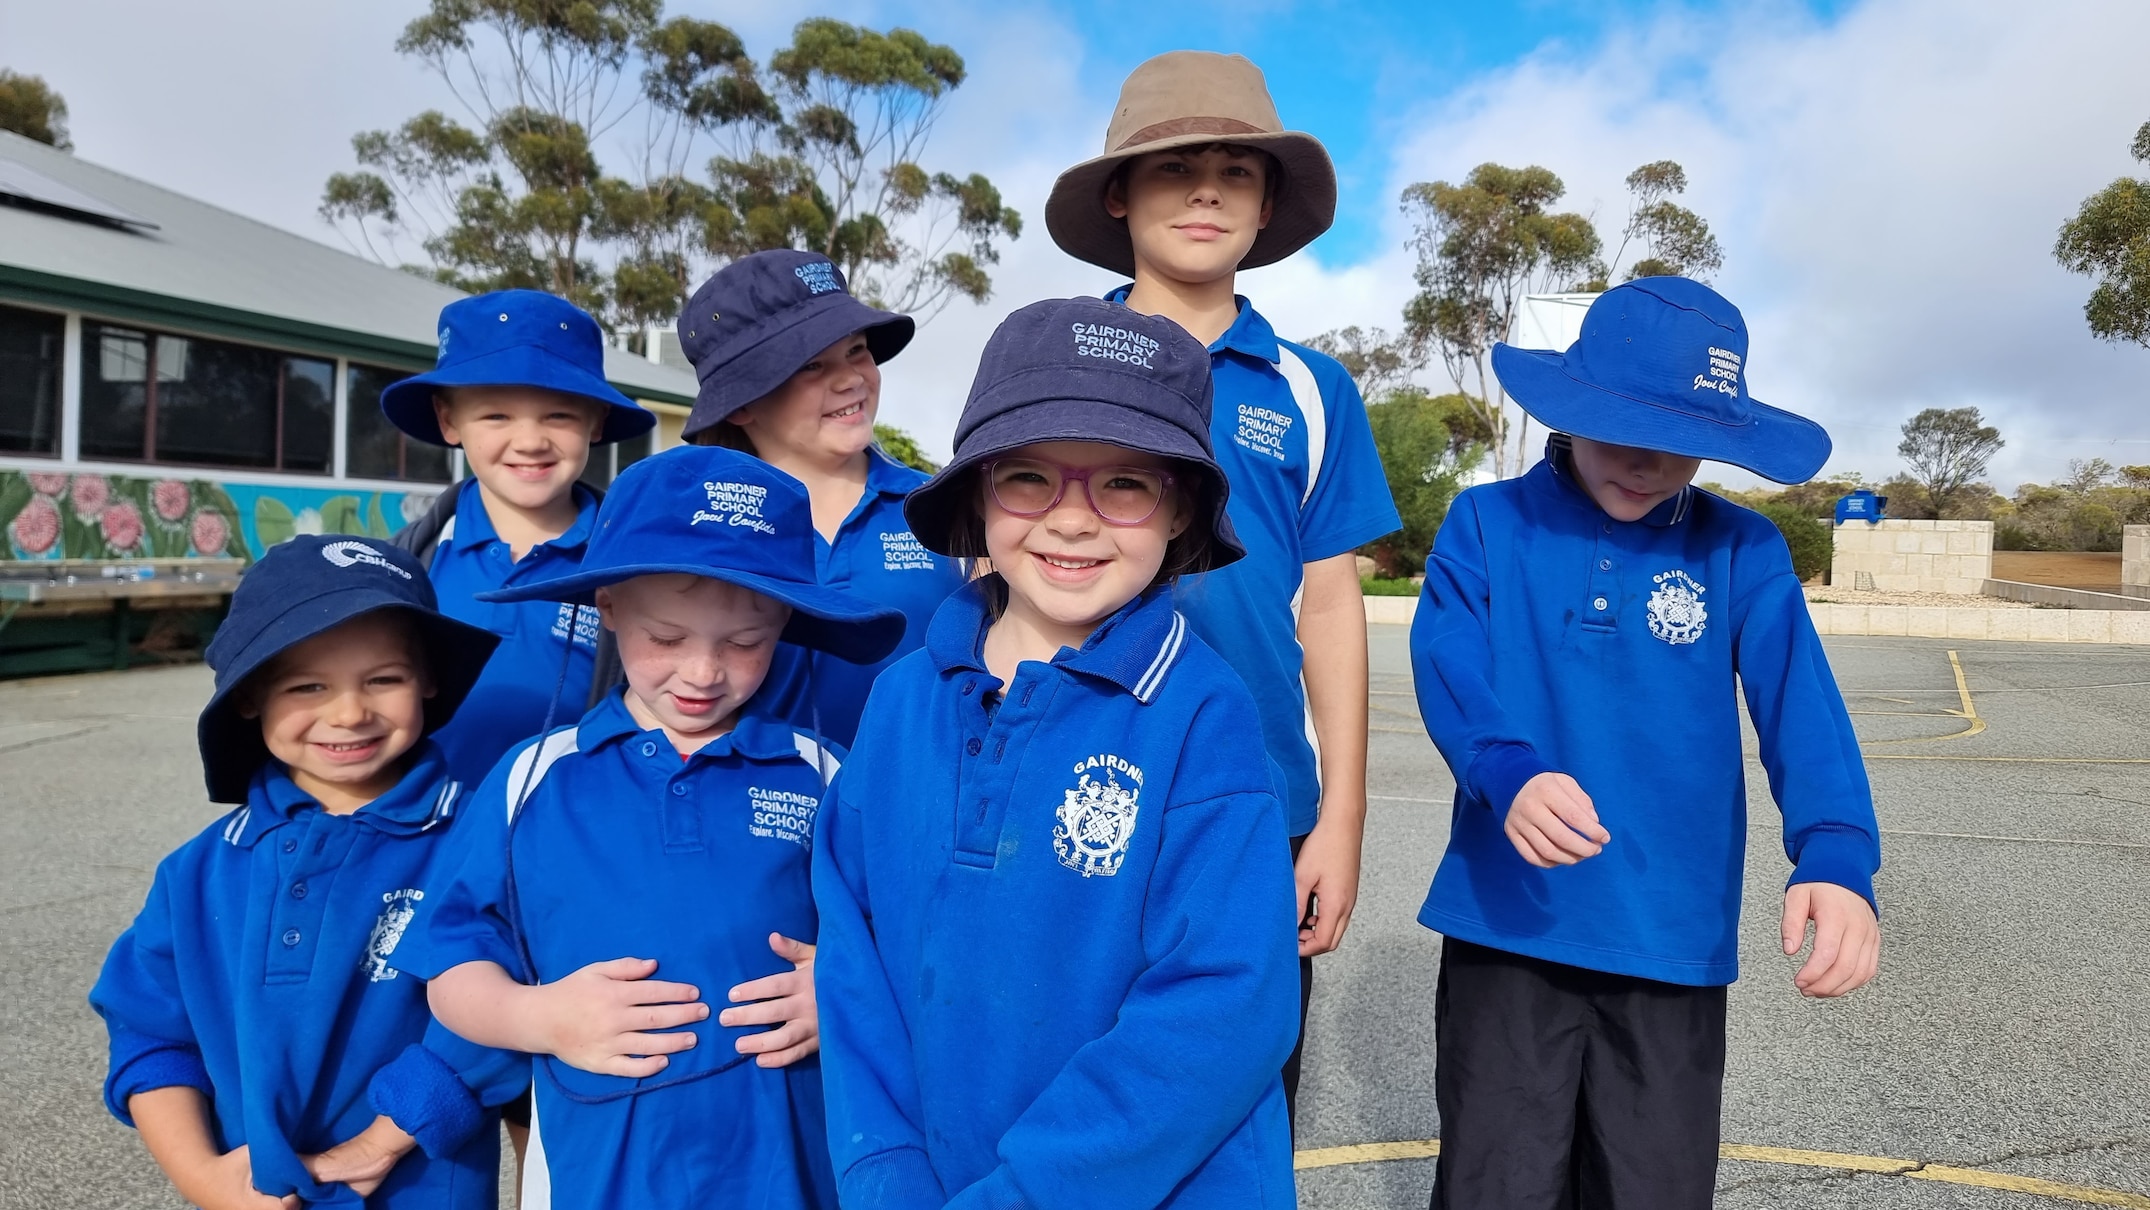 gairdner primary school student numbers rebound from zero due to staff's hard work re-engaging with parents